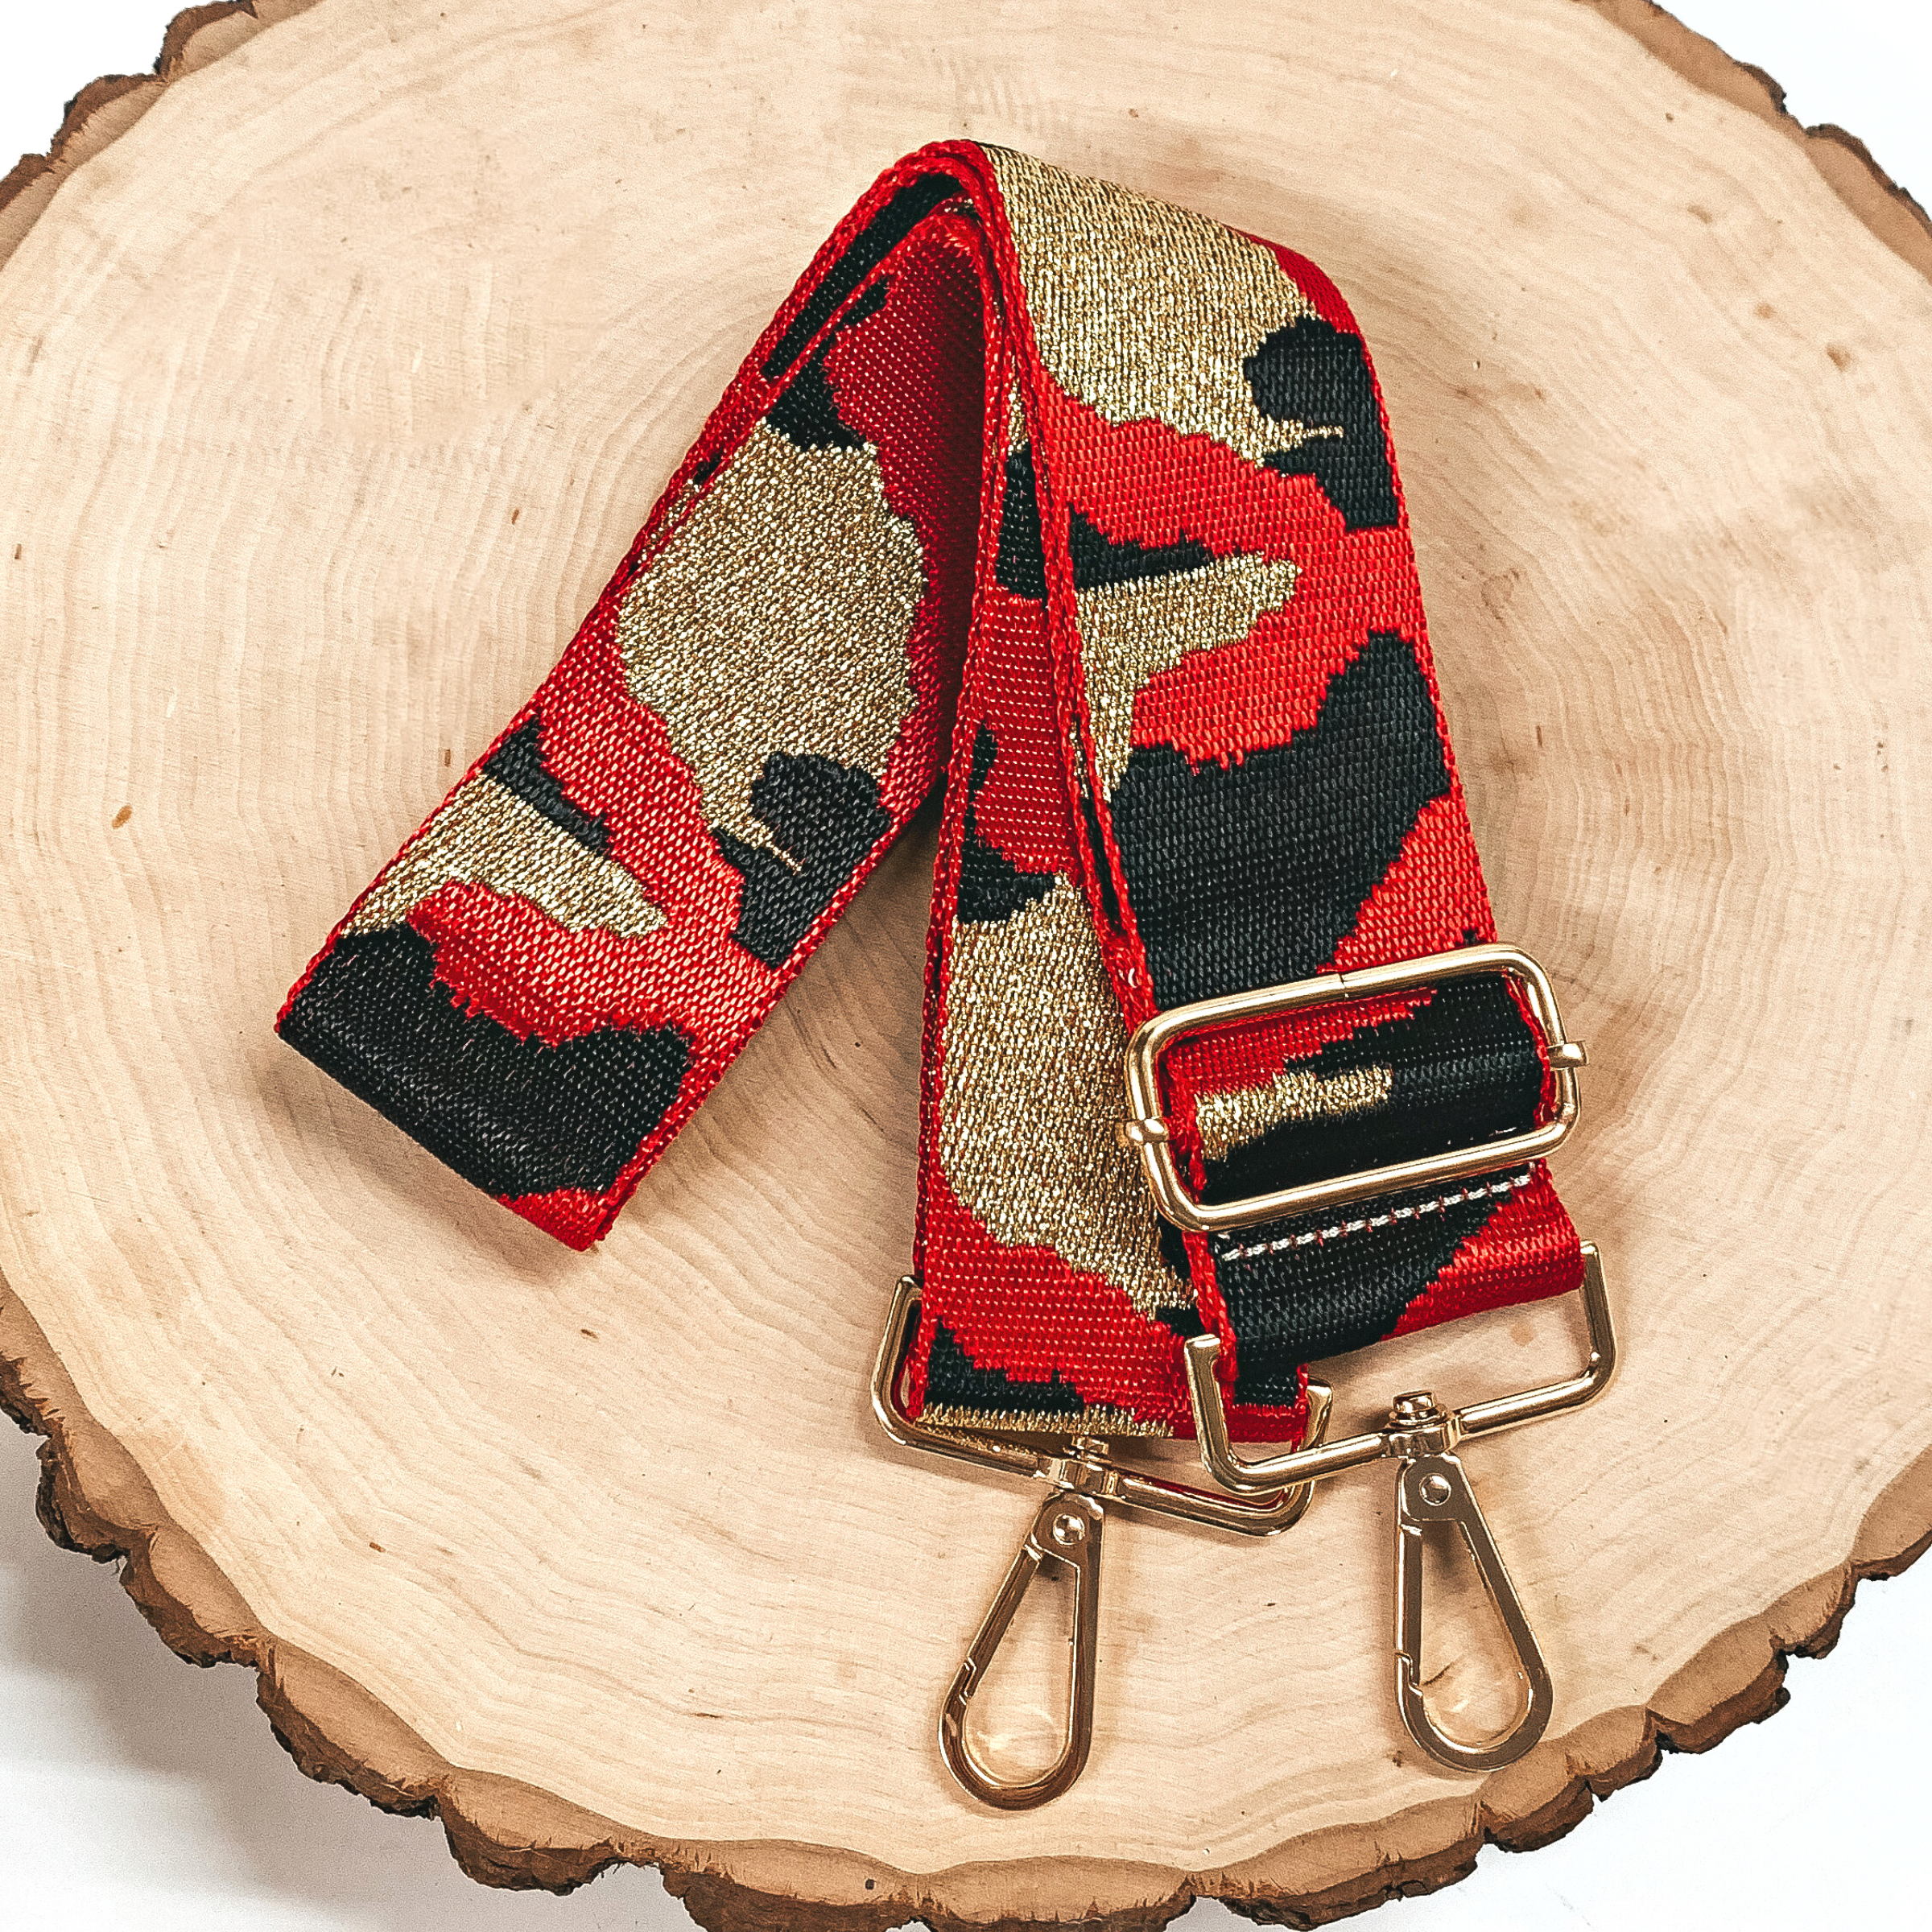 Camo Print Adjustable Purse Strap in Red, Gold, and Black - Giddy Up Glamour Boutique